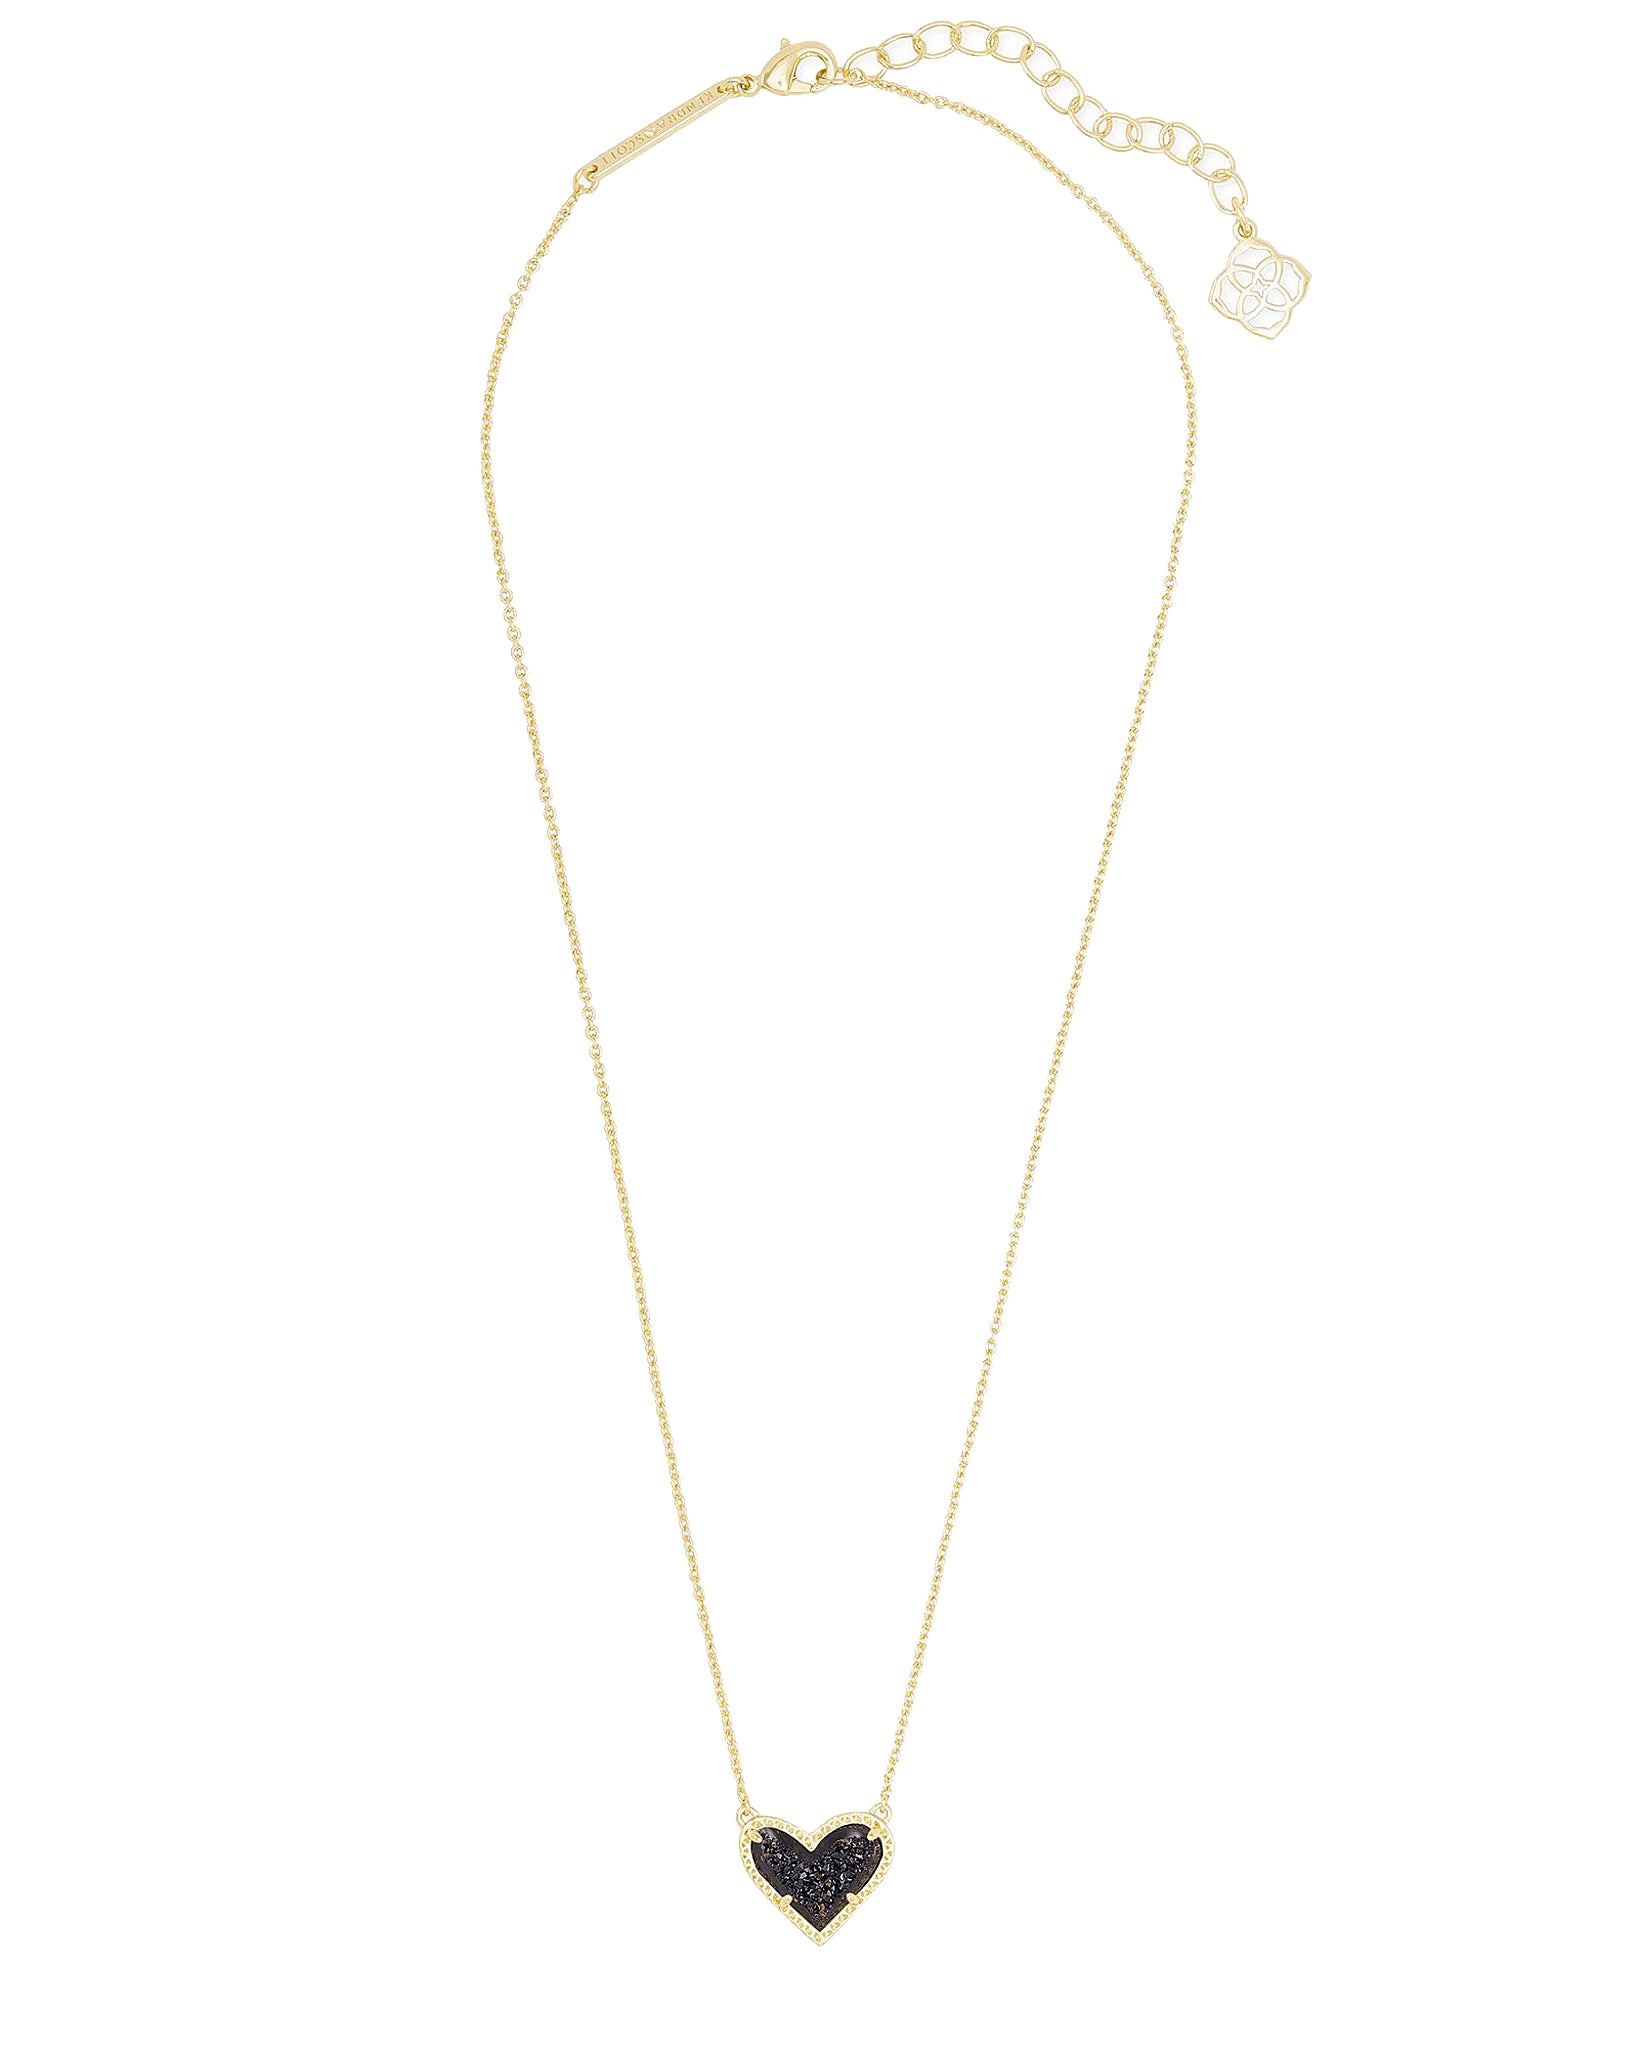 Kendra Scott Ari Heart Pendant Necklace in Black Drusy and Gold Plated